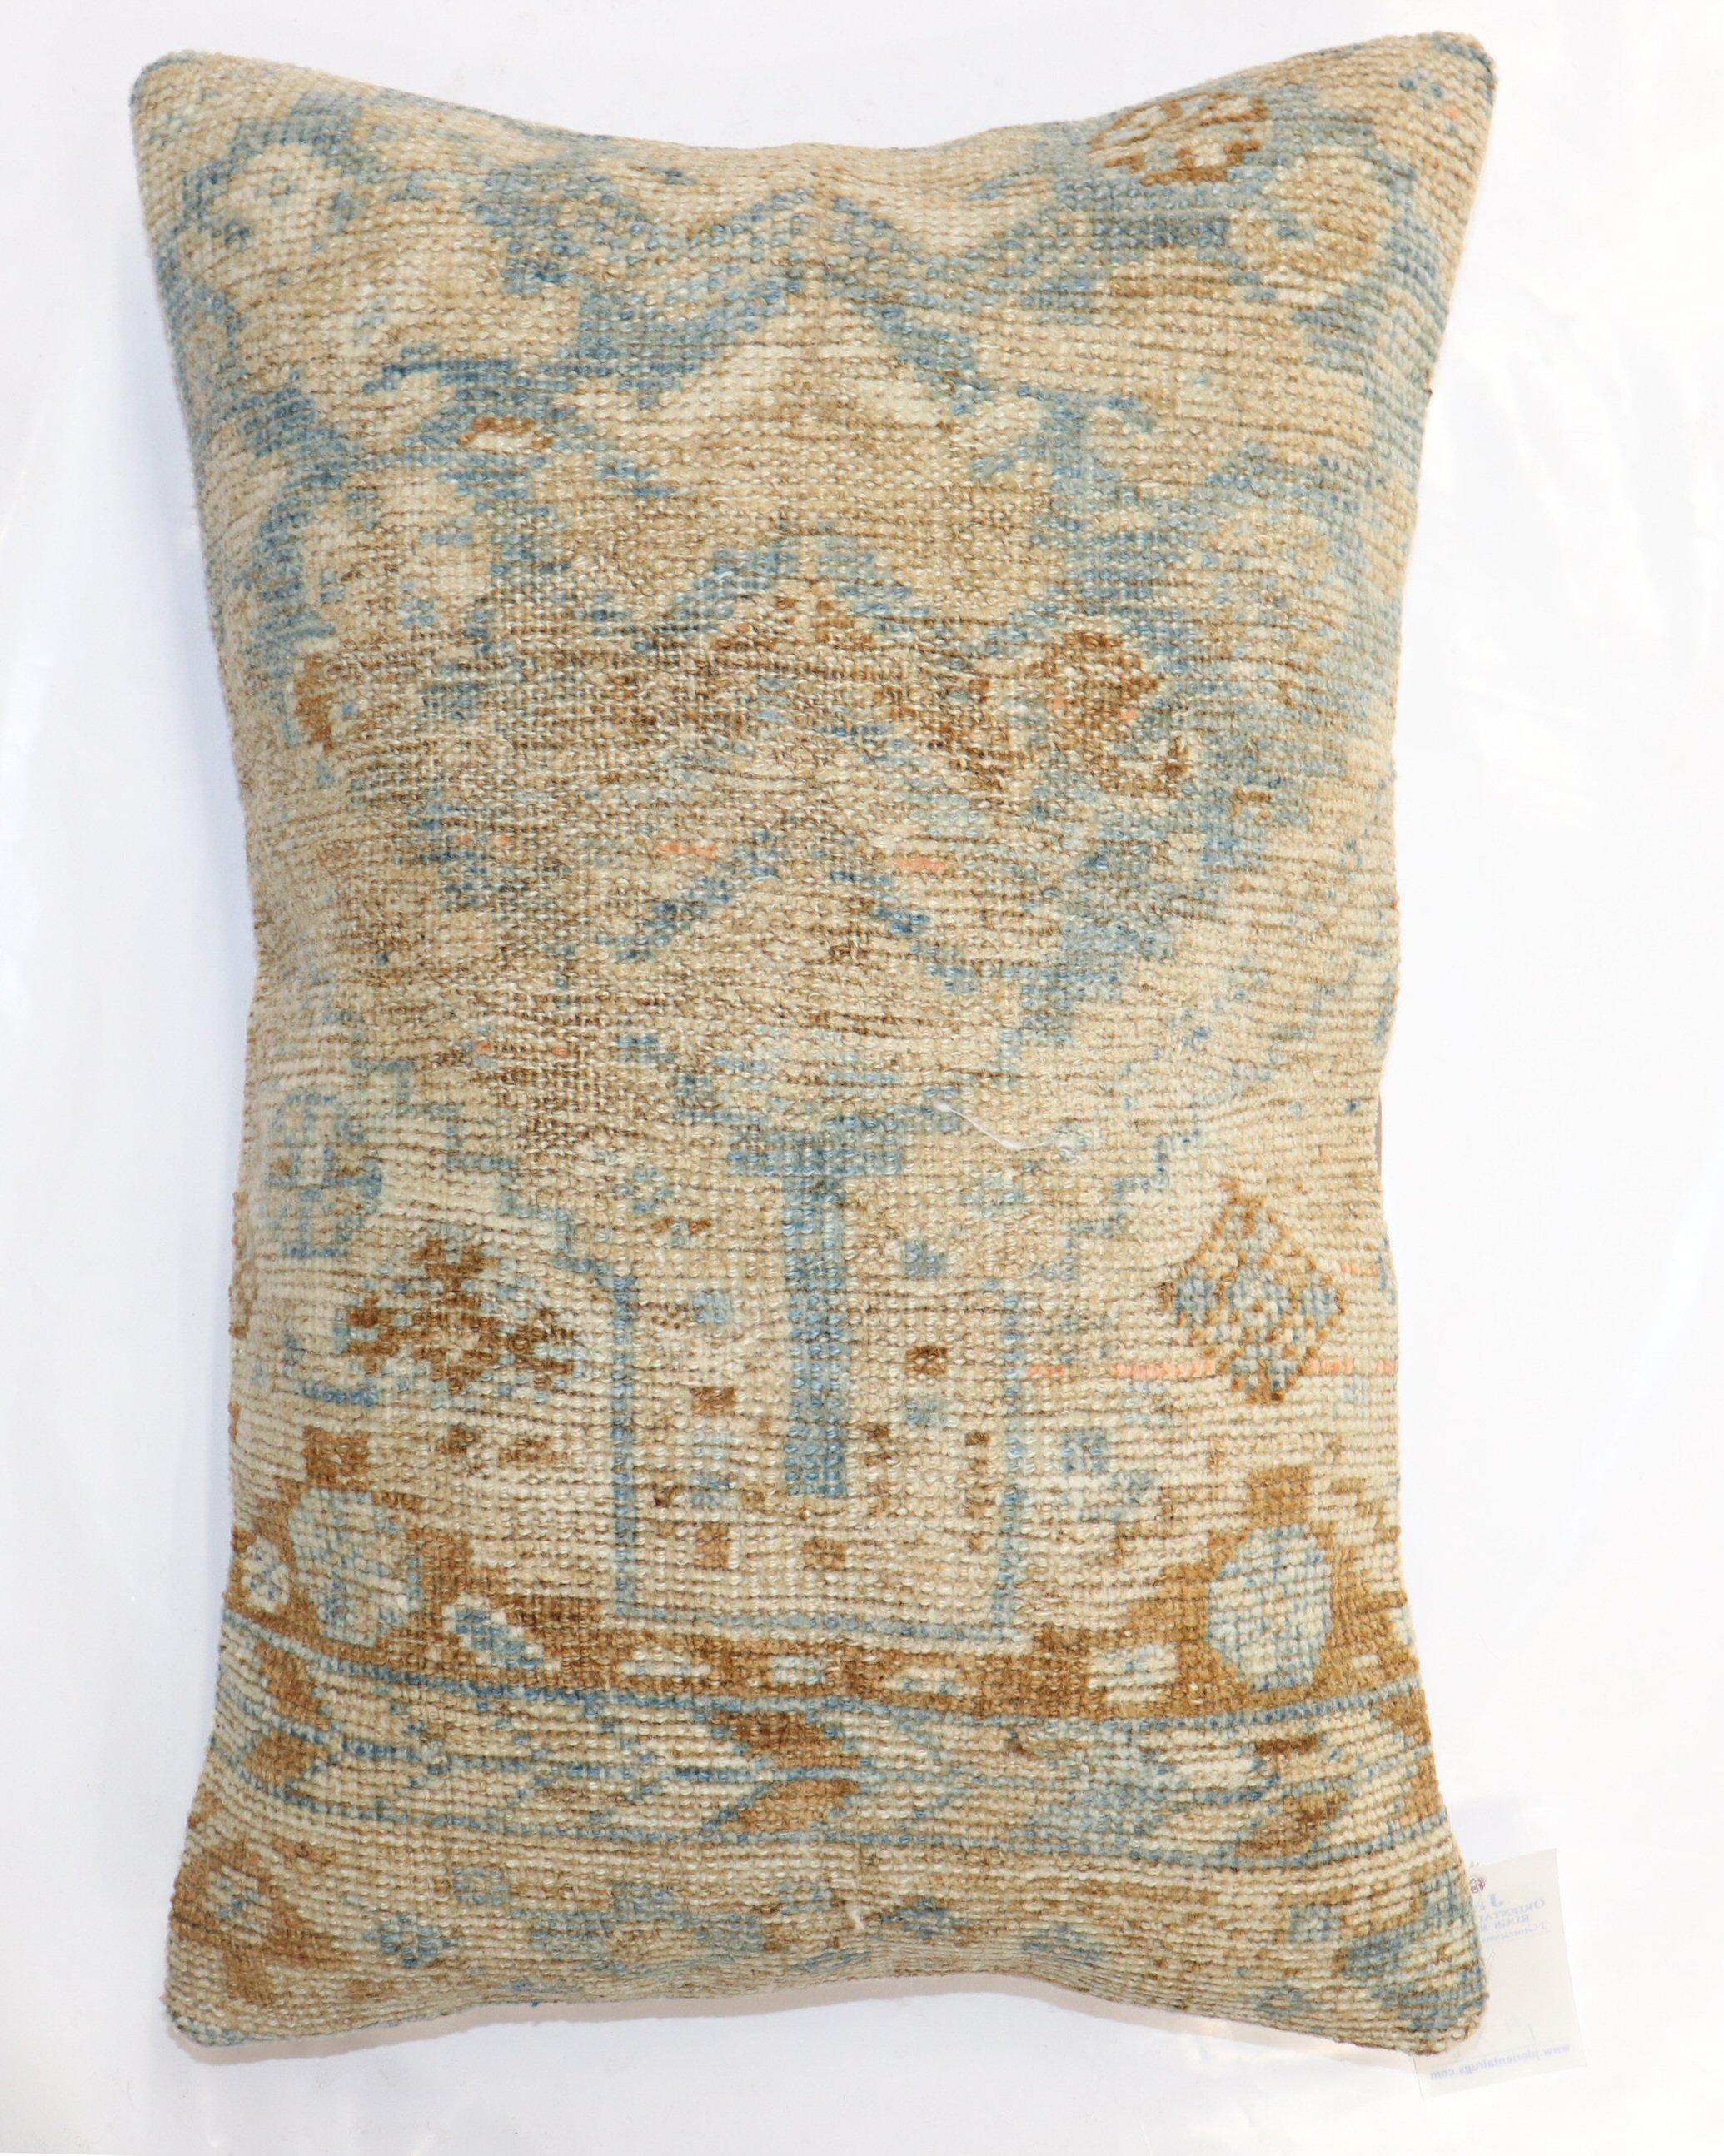 Pillow made from a late 19th-century antique Persian Bakshaish rug with cotton back. Zipper closure.

Measures: 16'' x 23''.